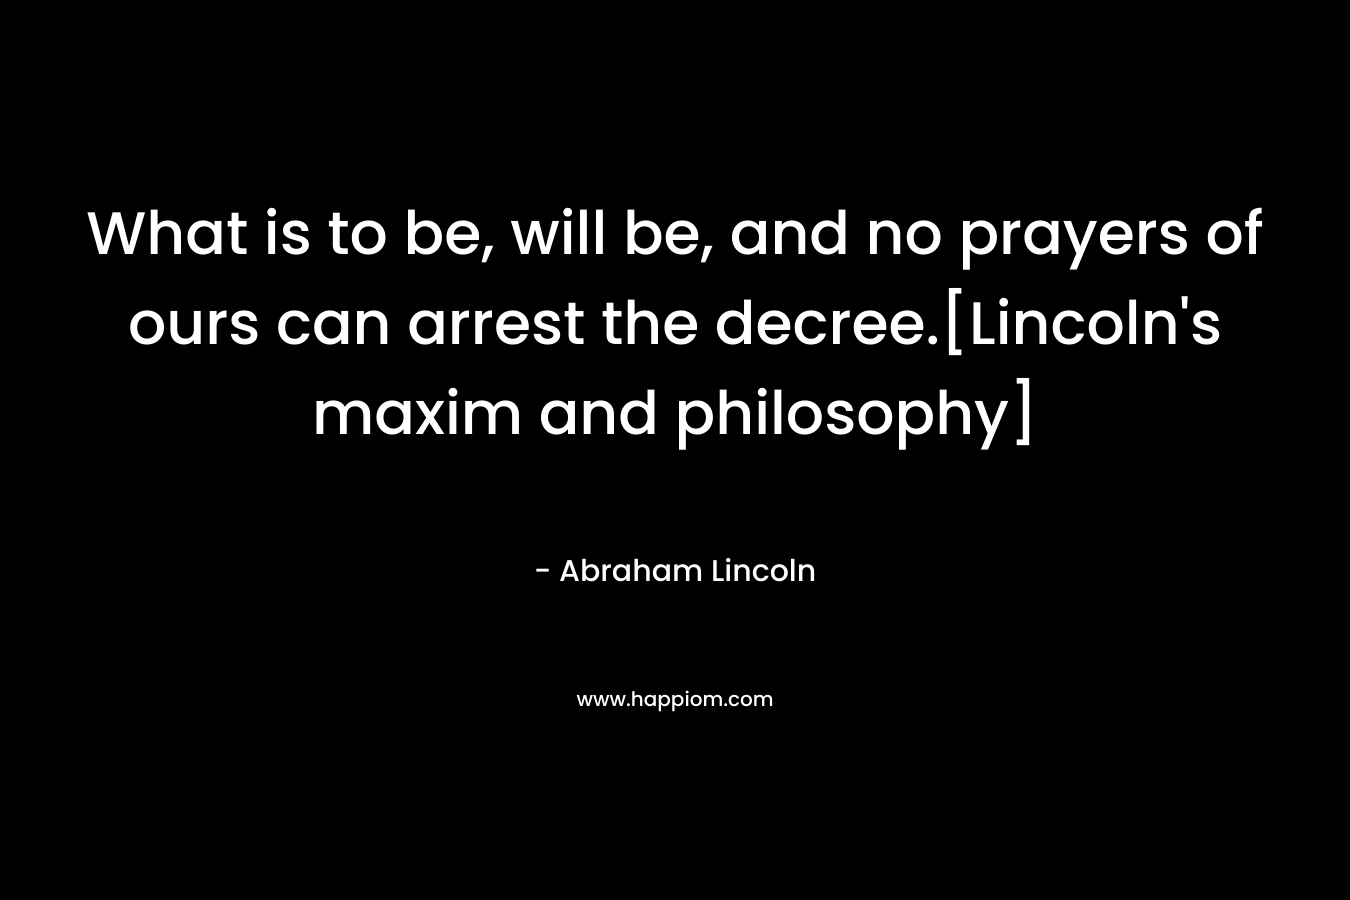 What is to be, will be, and no prayers of ours can arrest the decree.[Lincoln's maxim and philosophy]